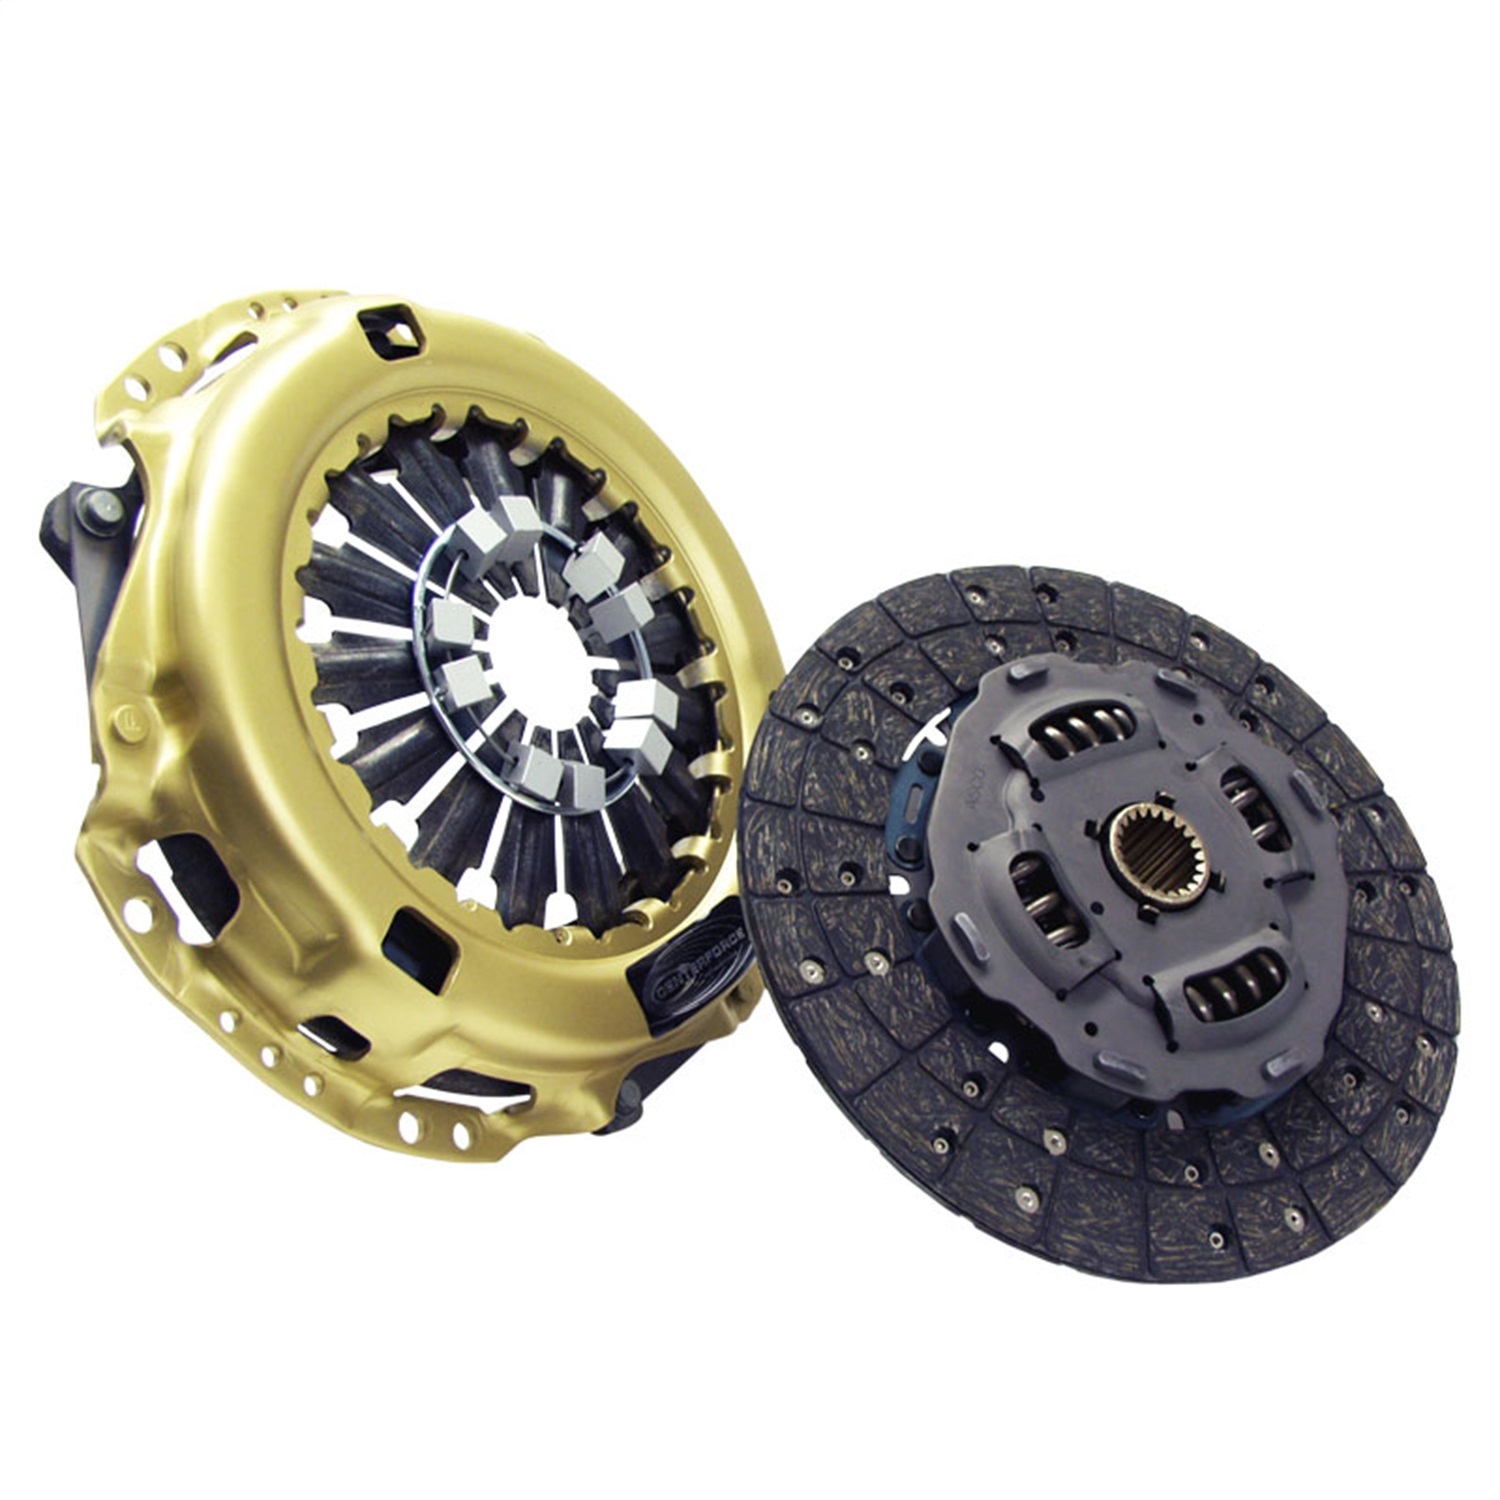 Centerforce Centerforce CF019505 Centerforce I; Clutch Pressure Plate And Disc Set